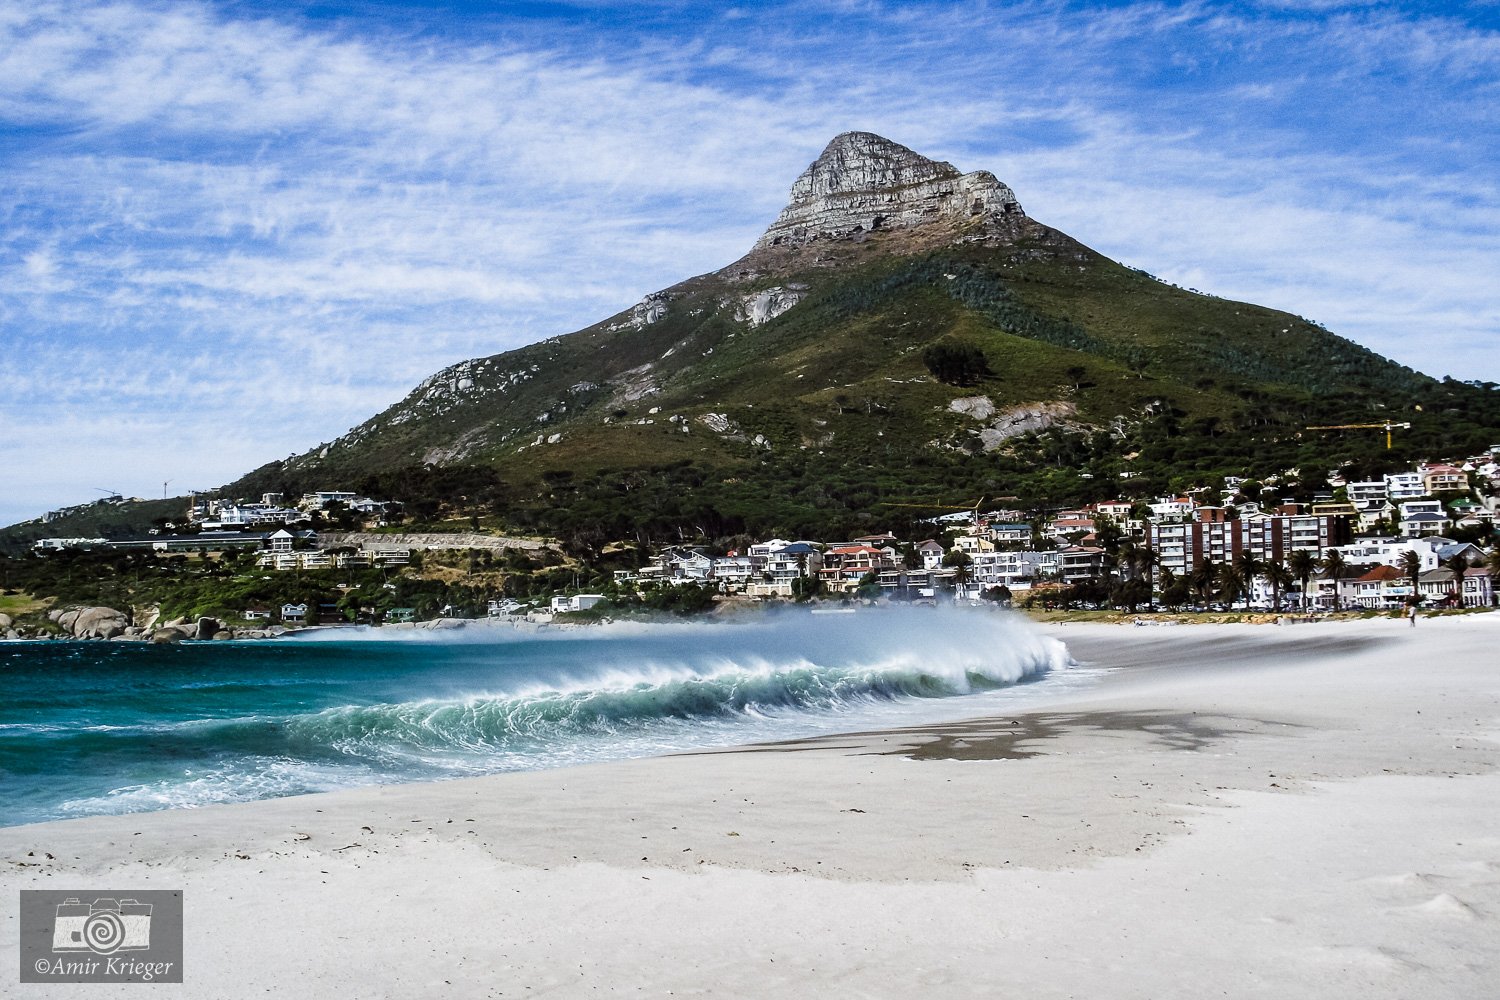  Cape Town, South Africa 